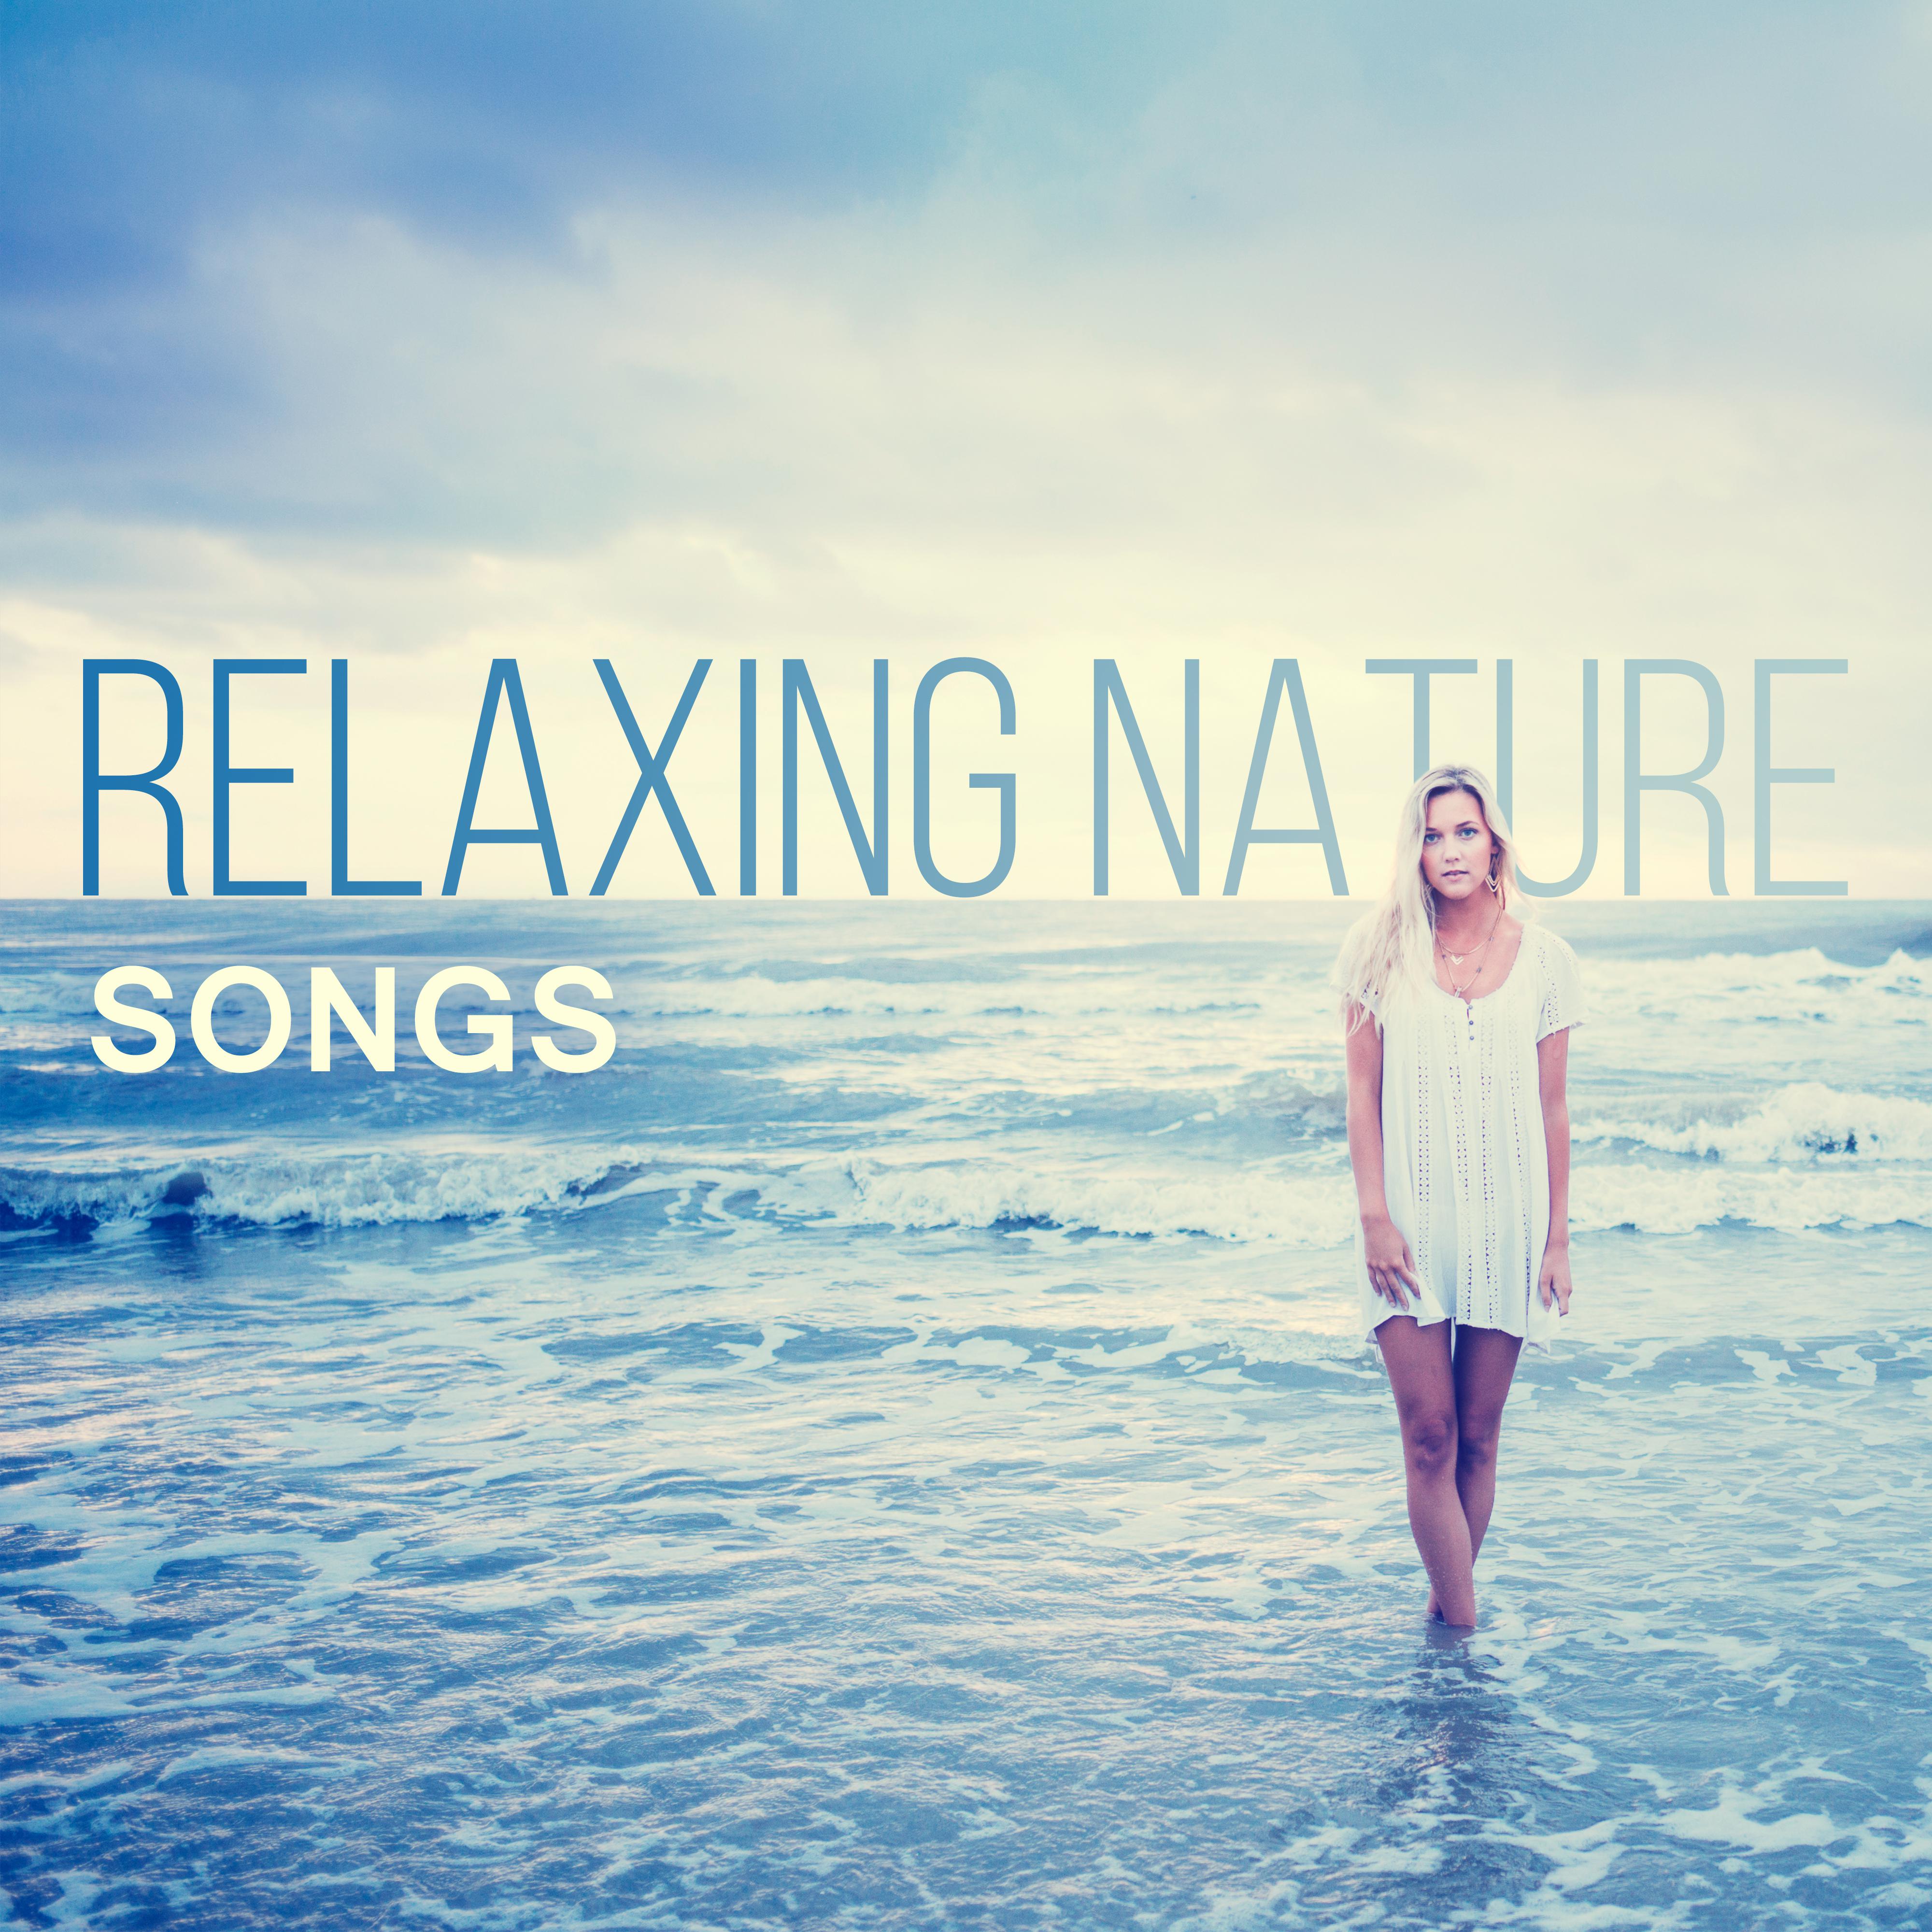 Relaxing Nature Songs – Peaceful Nature Songs, Soothing Rain, Ocean Waves for Calm Down, Deep Relax & Good Night, Easily Fall Asleep